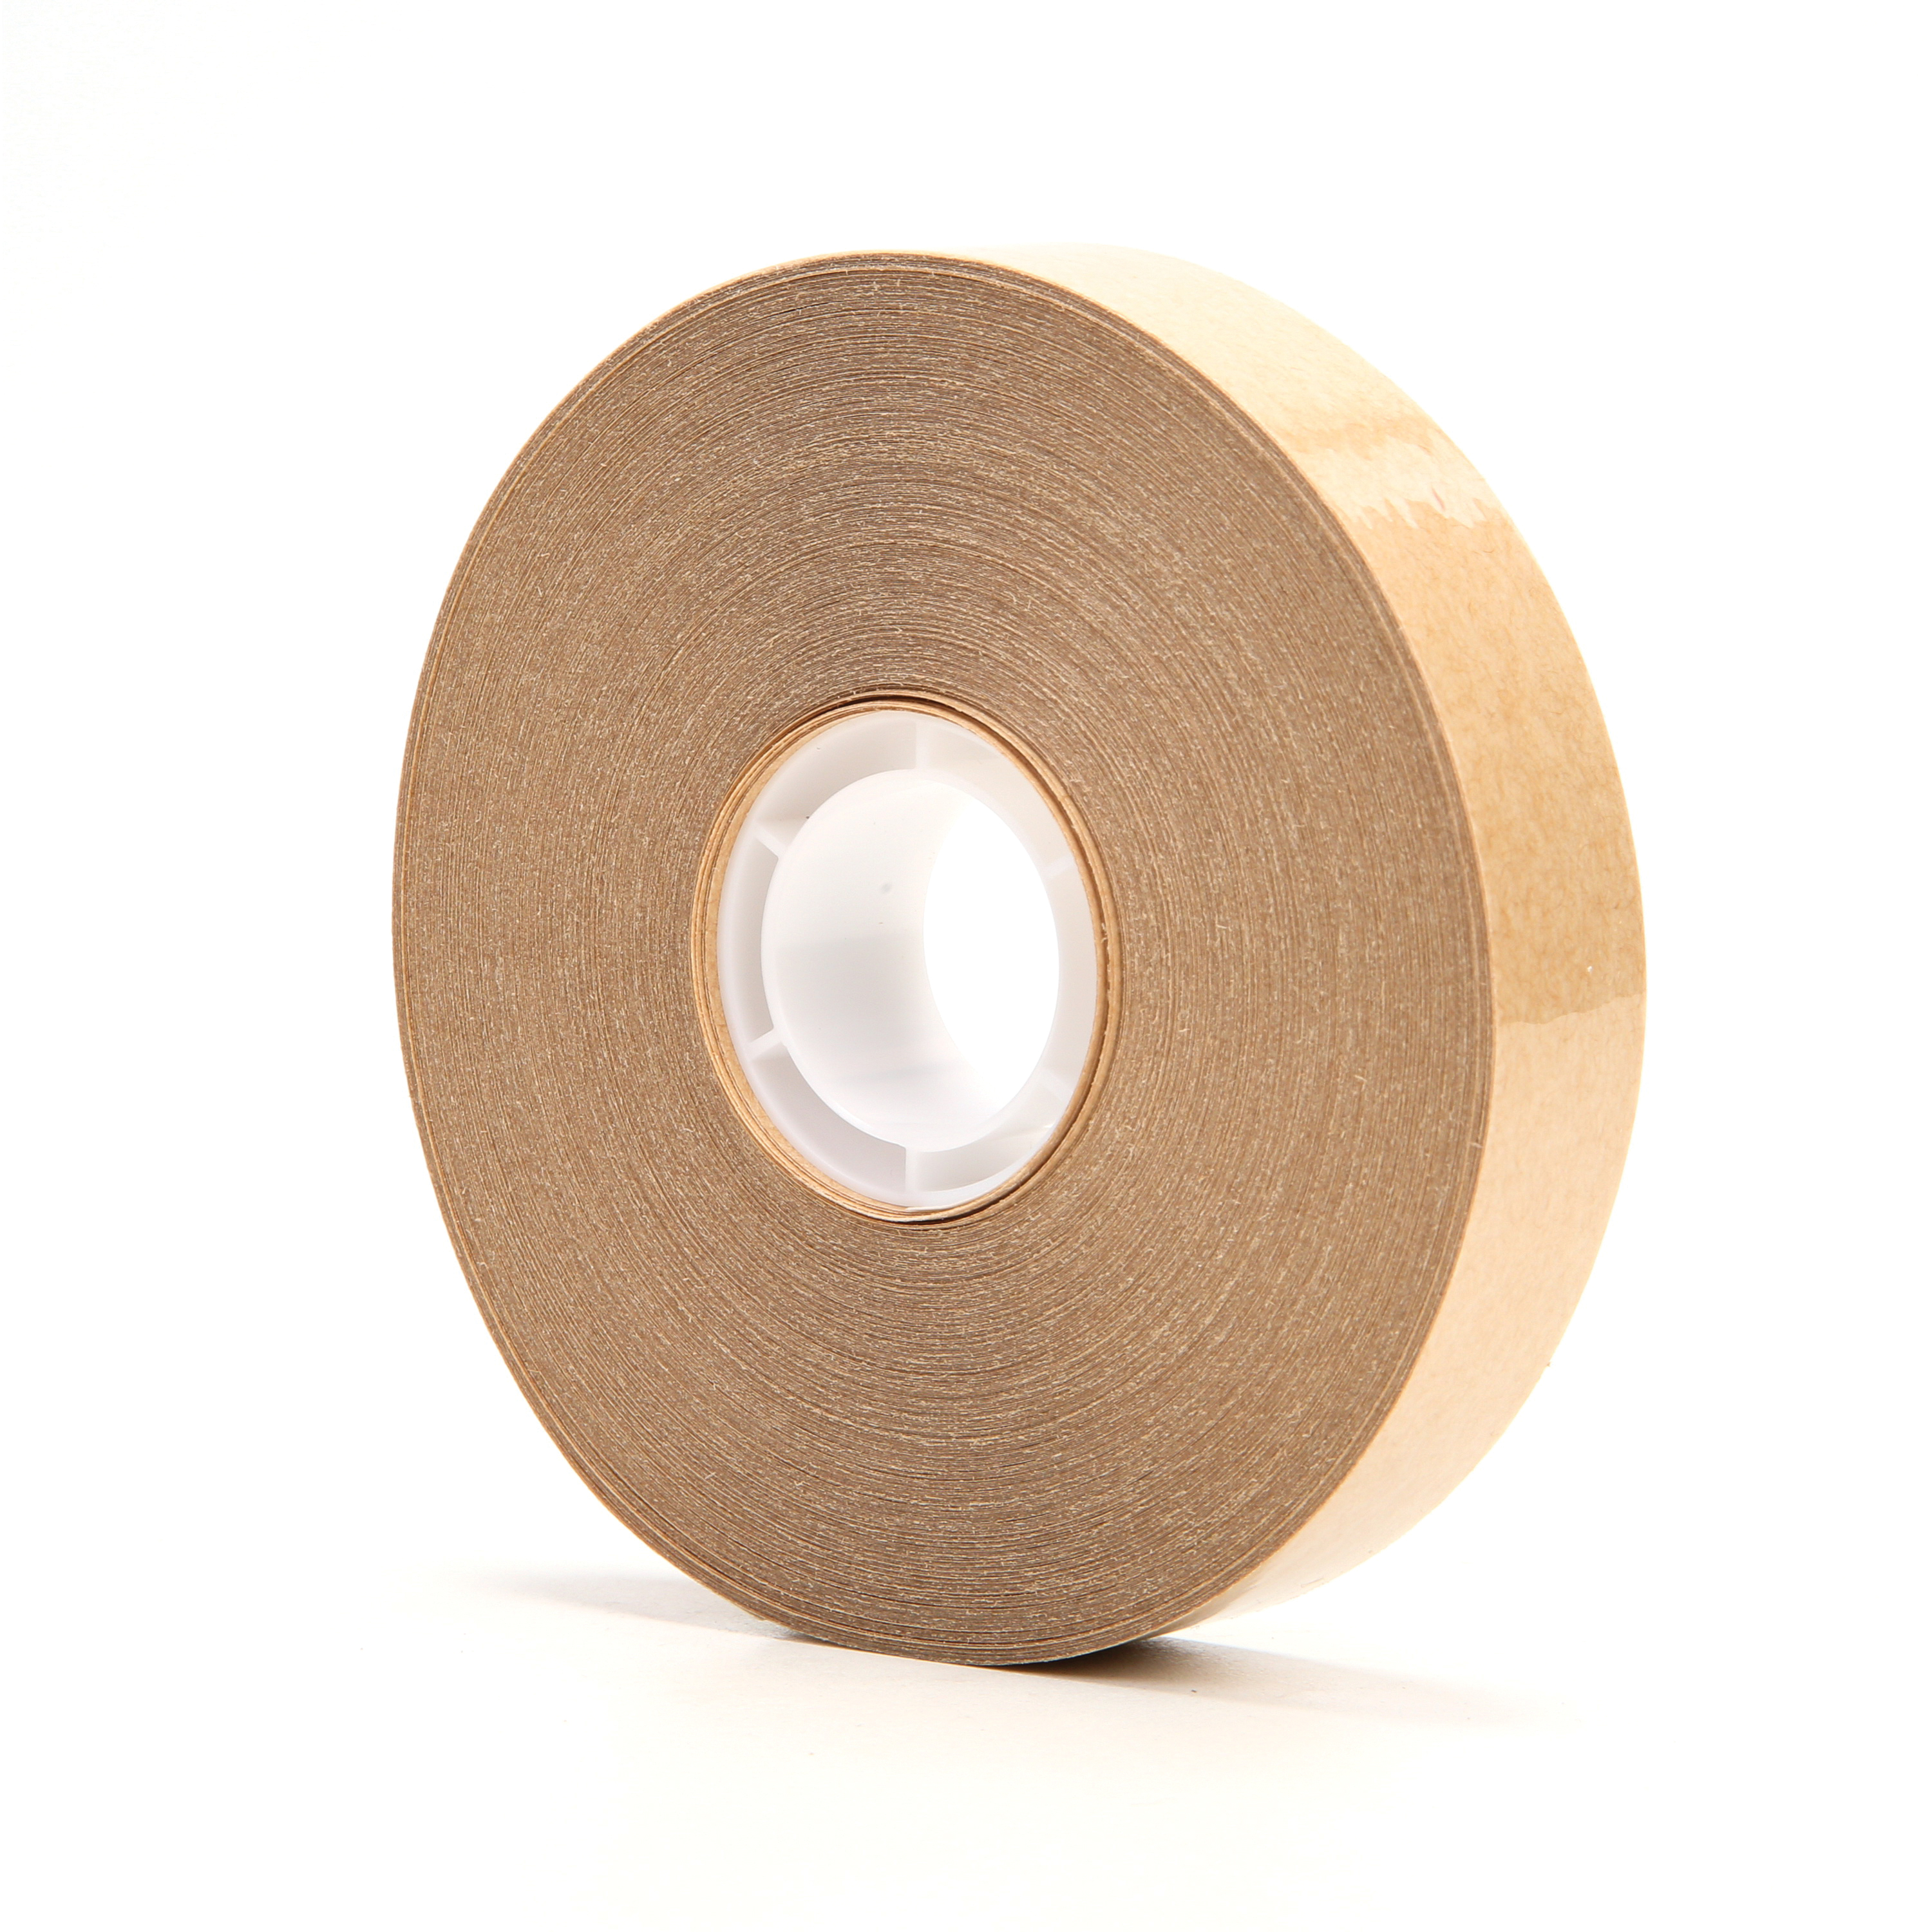 3M™ 021200-31490 Utility-Grade Adhesive Transfer Tape, 60 yd L x 3/4 in W, 2 mil THK, 1.7 mil 400 Acrylic Adhesive, Clear